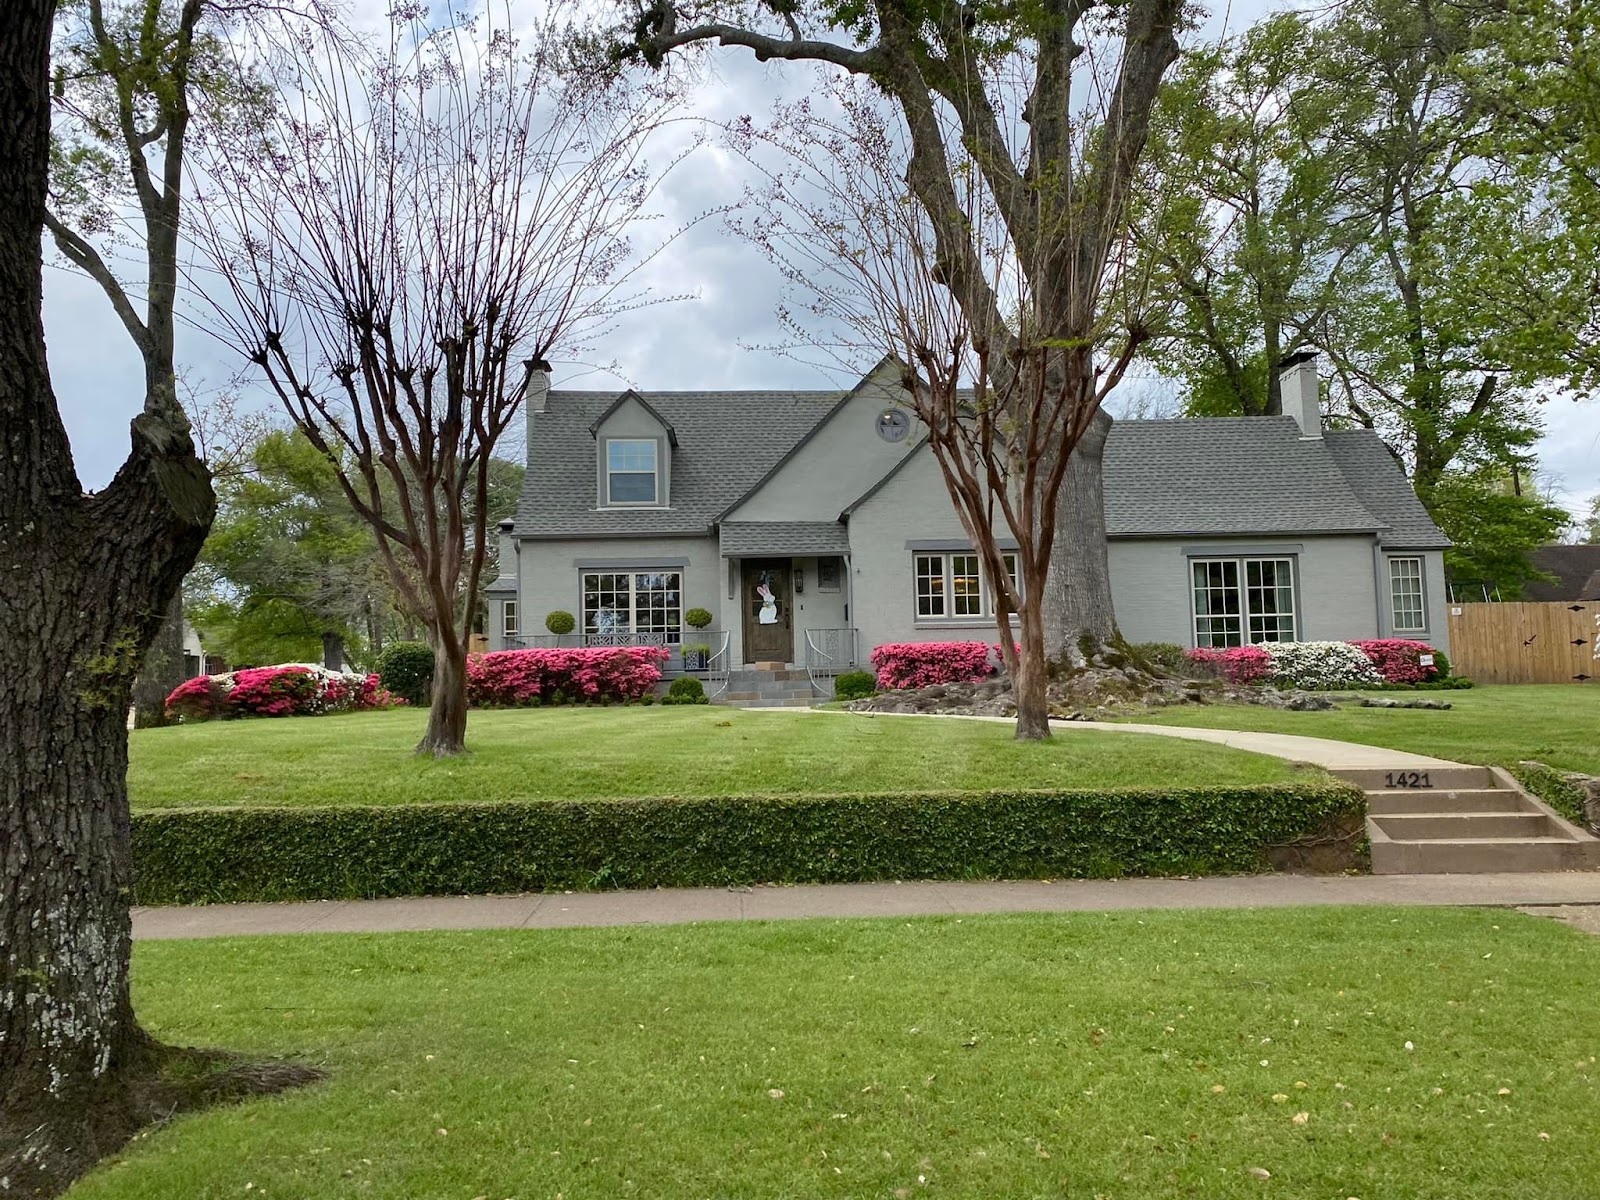 Picture of house with pink azaleas, located in the Azalea District of Tyler, TX